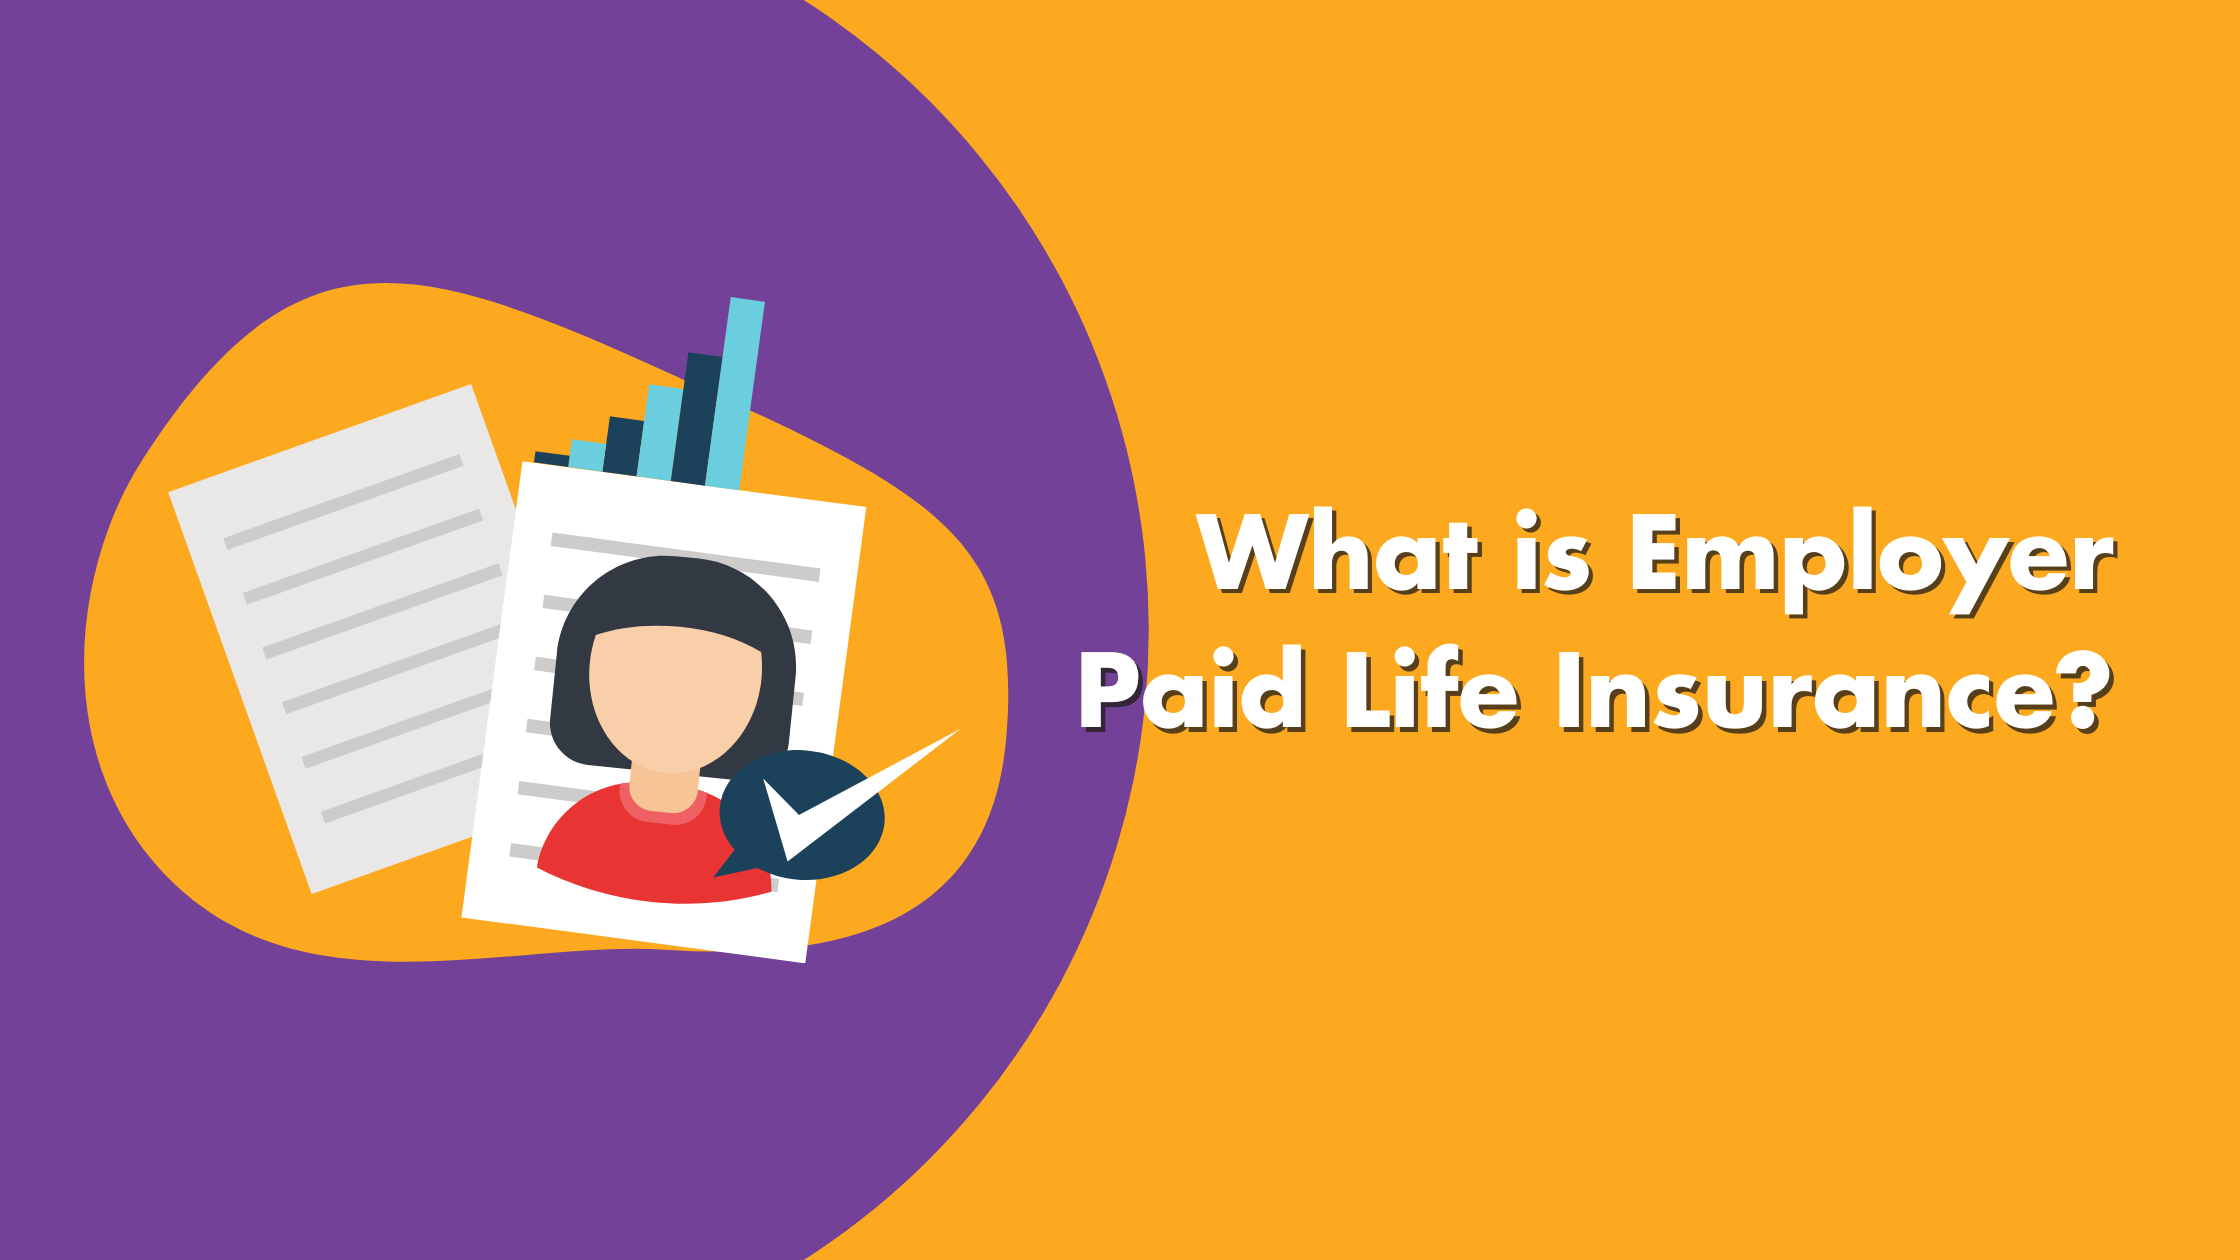 What Is Employer Paid Life Insurance